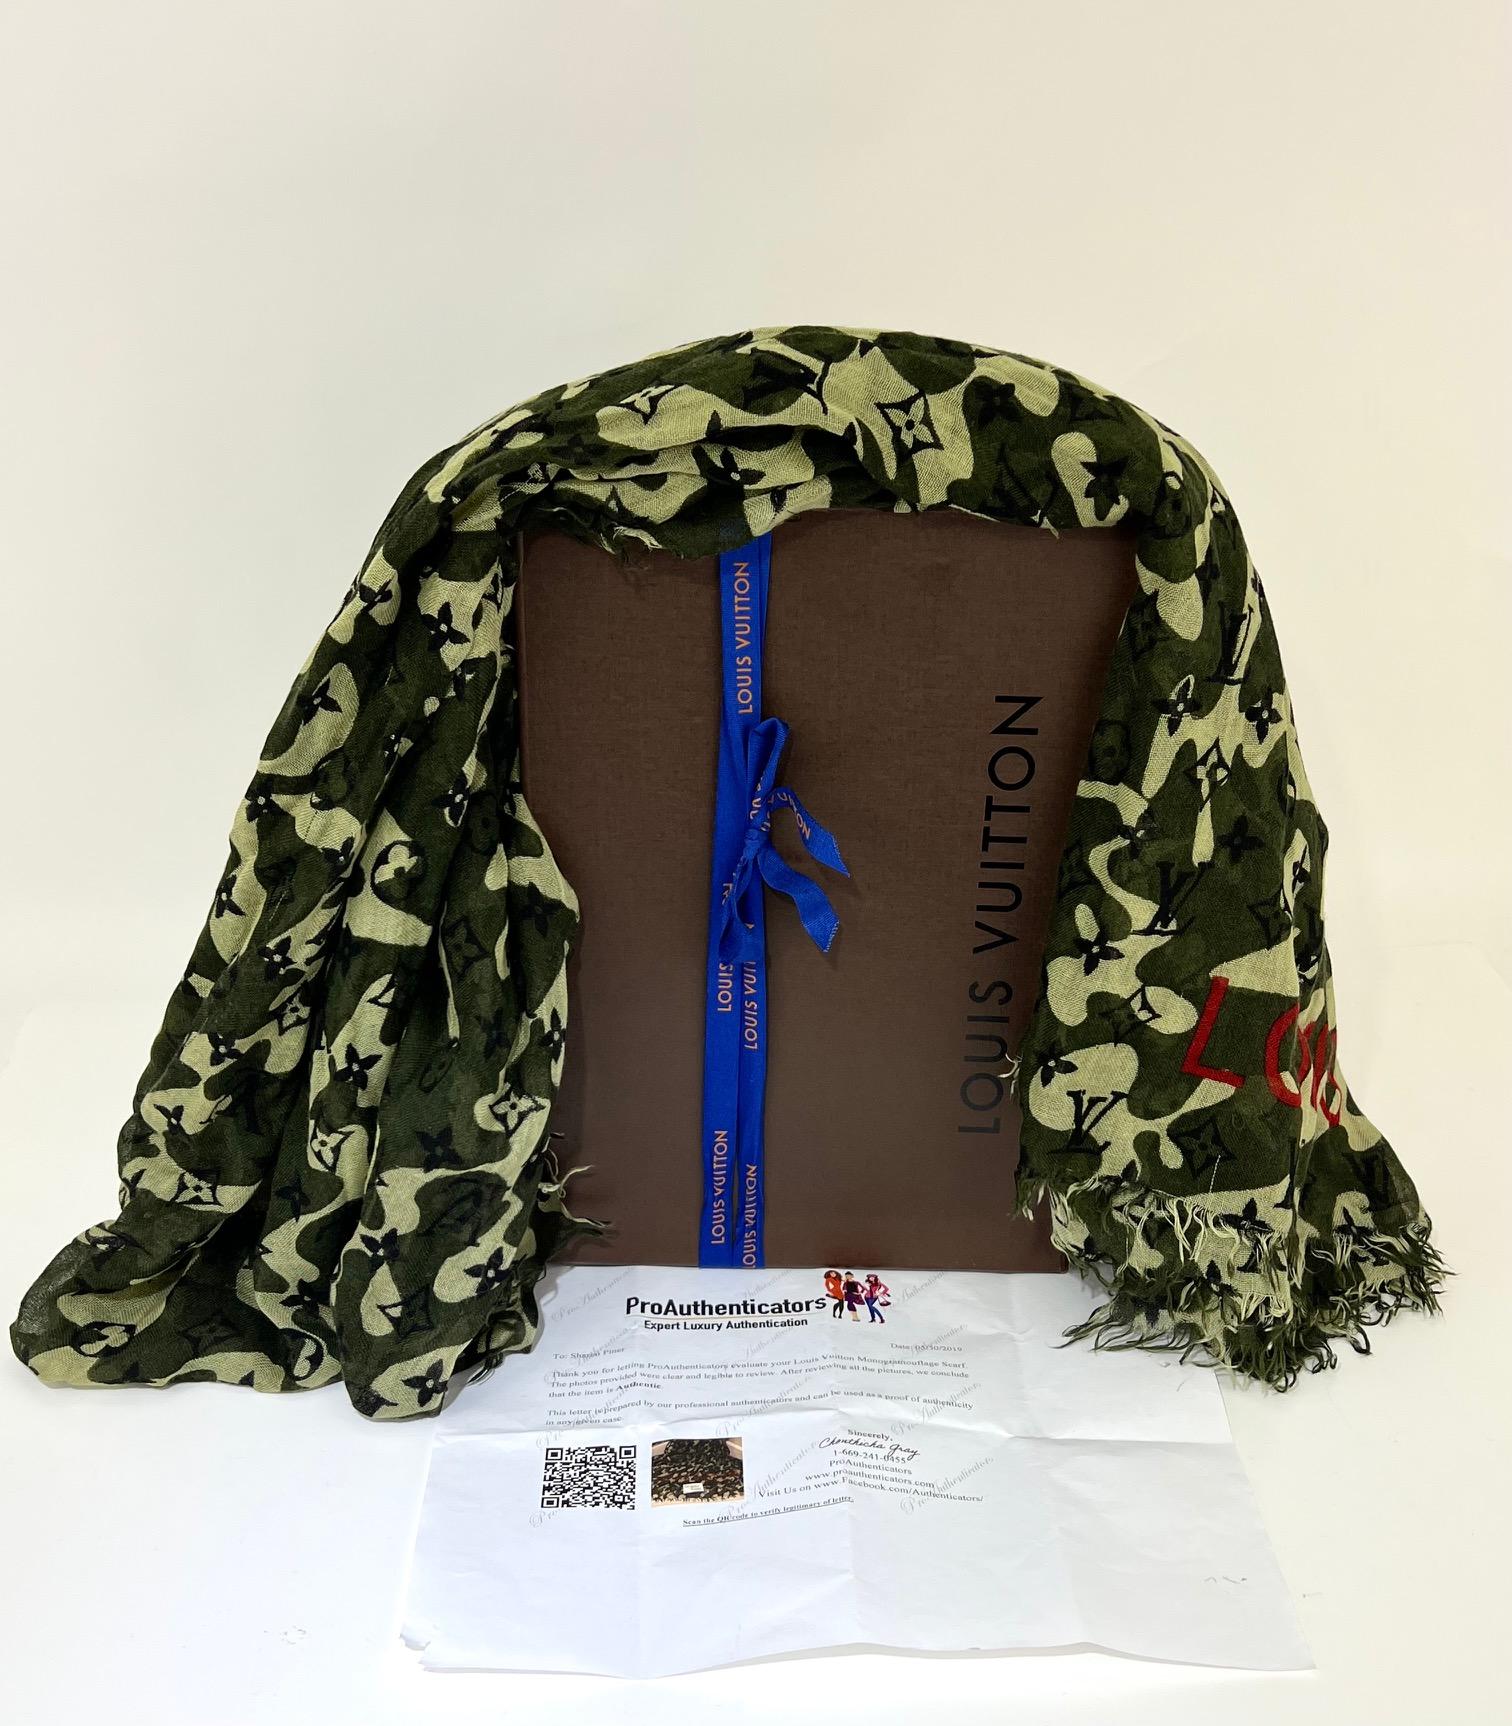 Louis Vuitton Supreme Authenticated Scarf